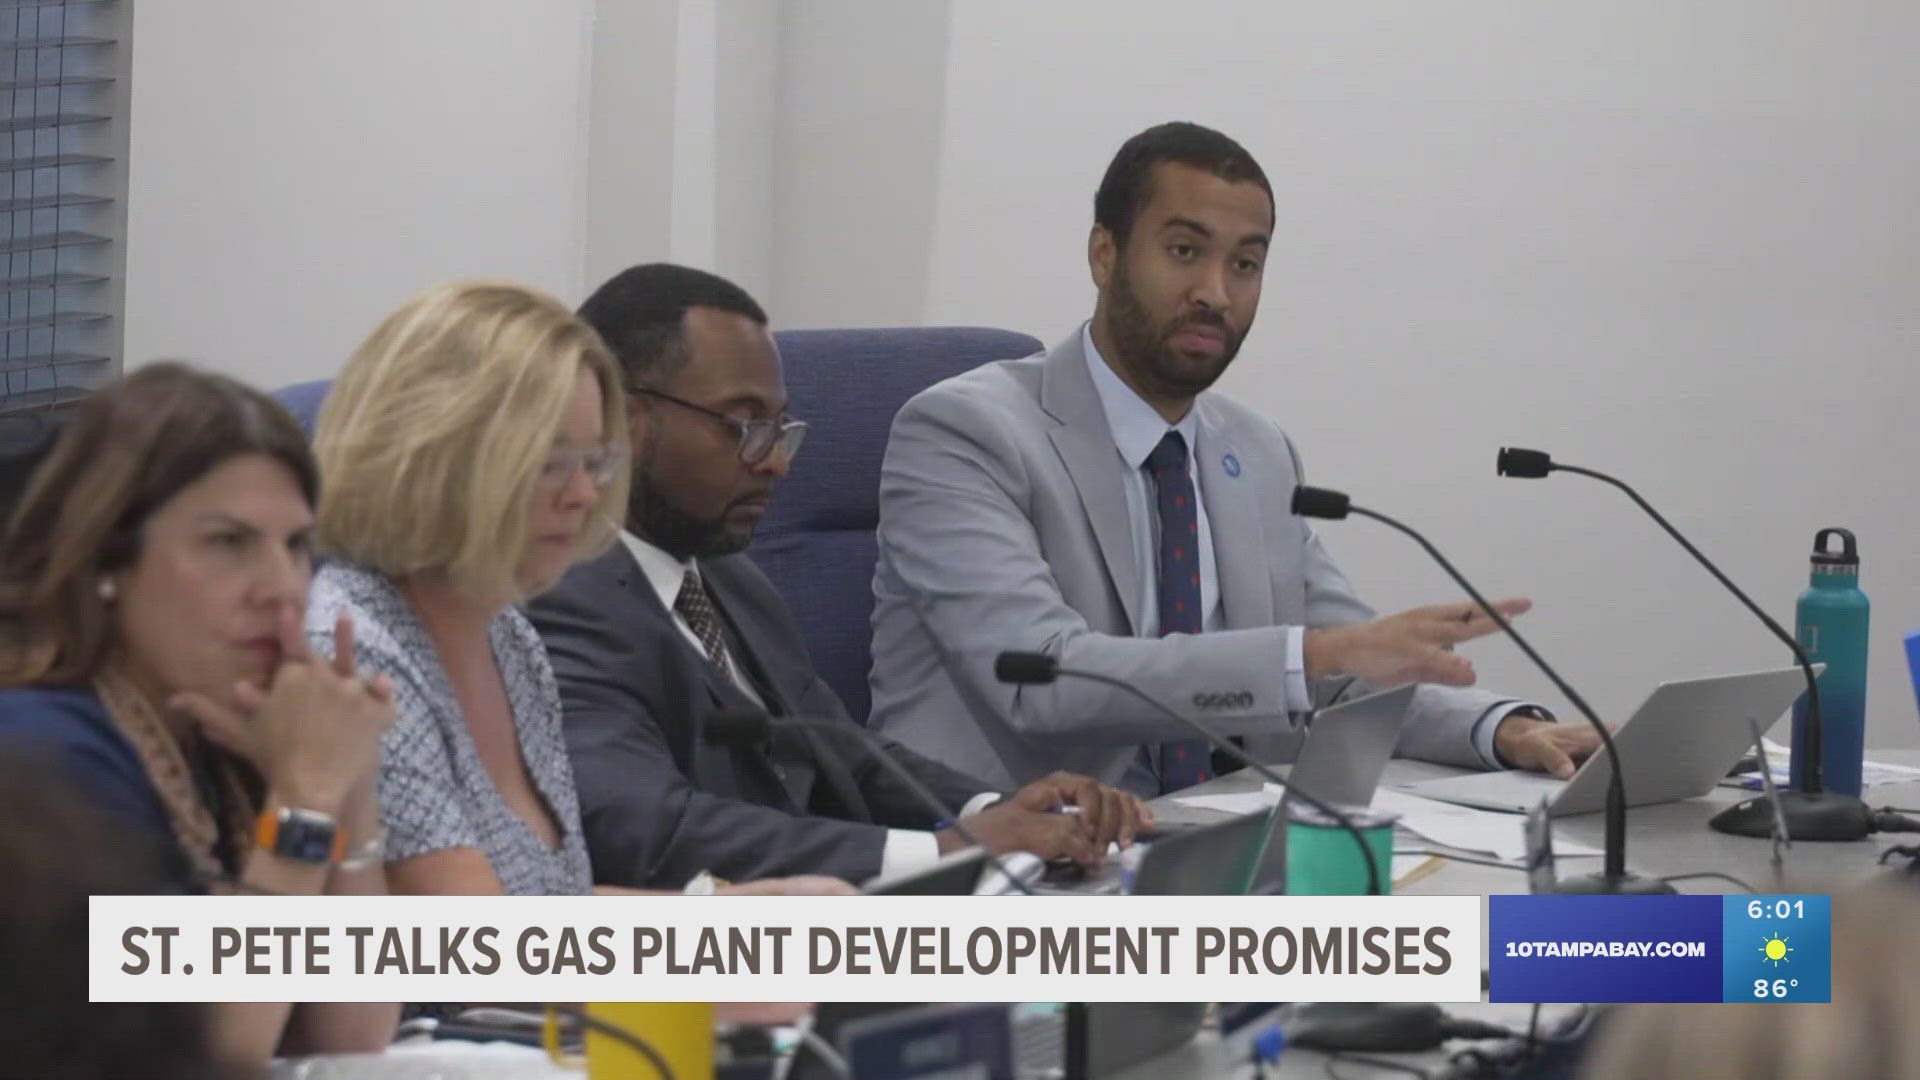 Members of St. Pete City Council discuss the proposed multi-billion-dollar redevelopment of the historic gas plant district.